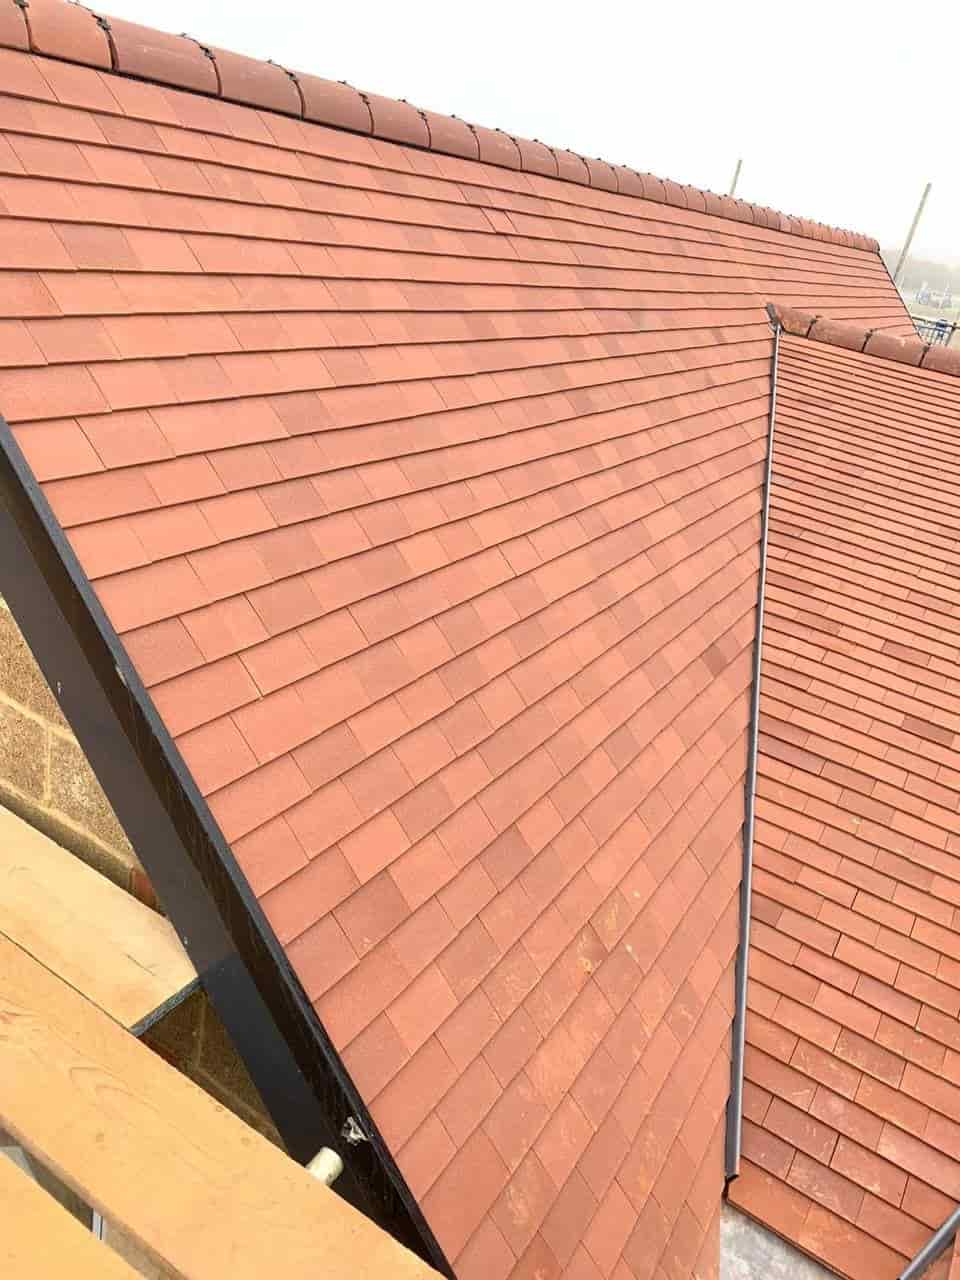 This is a photo of a new roof installation. This work was carried our Stafford Roofing contractors